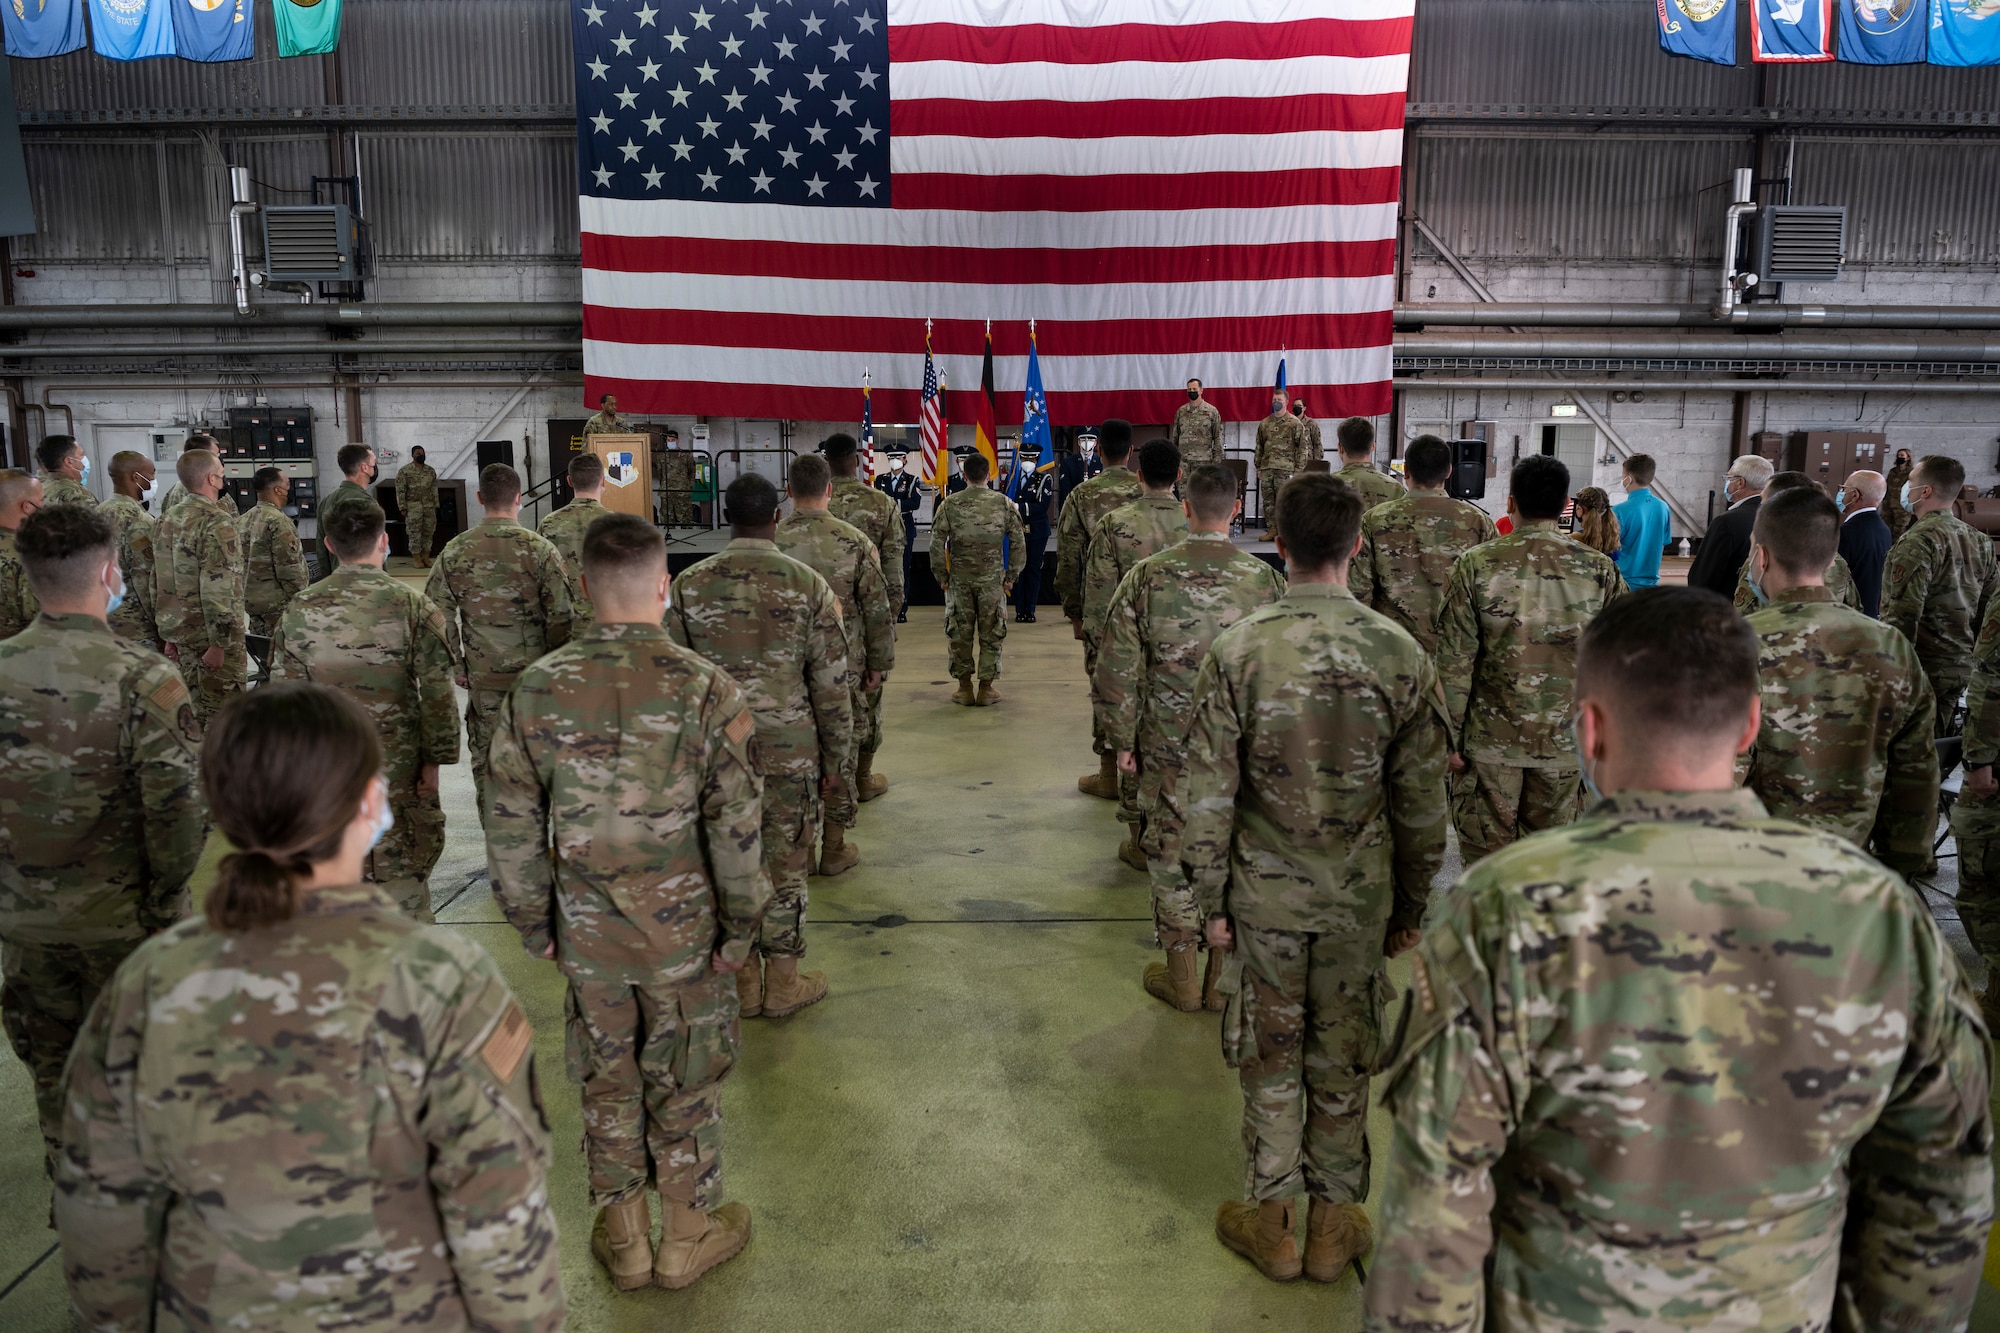 Audience members stand at attention for the playing of the “Star-Spangled Banner” during the 52nd Maintenance Squadron assumption of command ceremony July 9, 2021, on Spangdahlem Air Base, Germany.